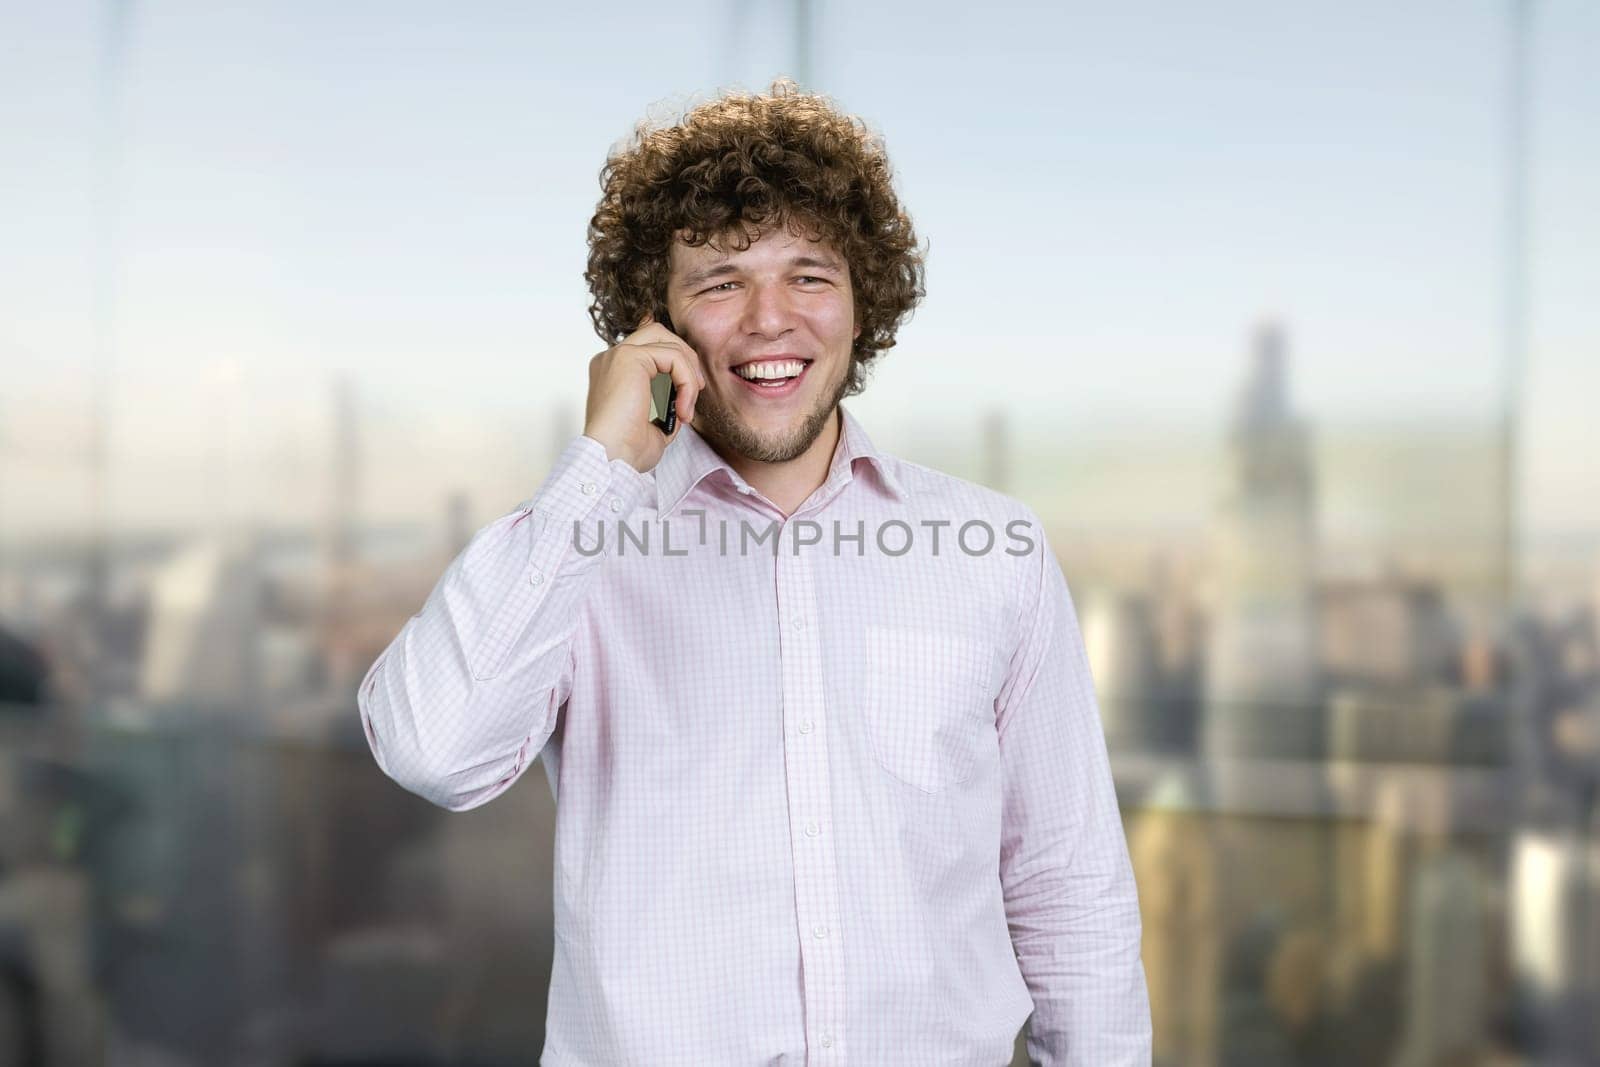 Portrait of a young caucasian guy in white shirt talking on the phone. Indoor window with blurred cityscape view in the background.